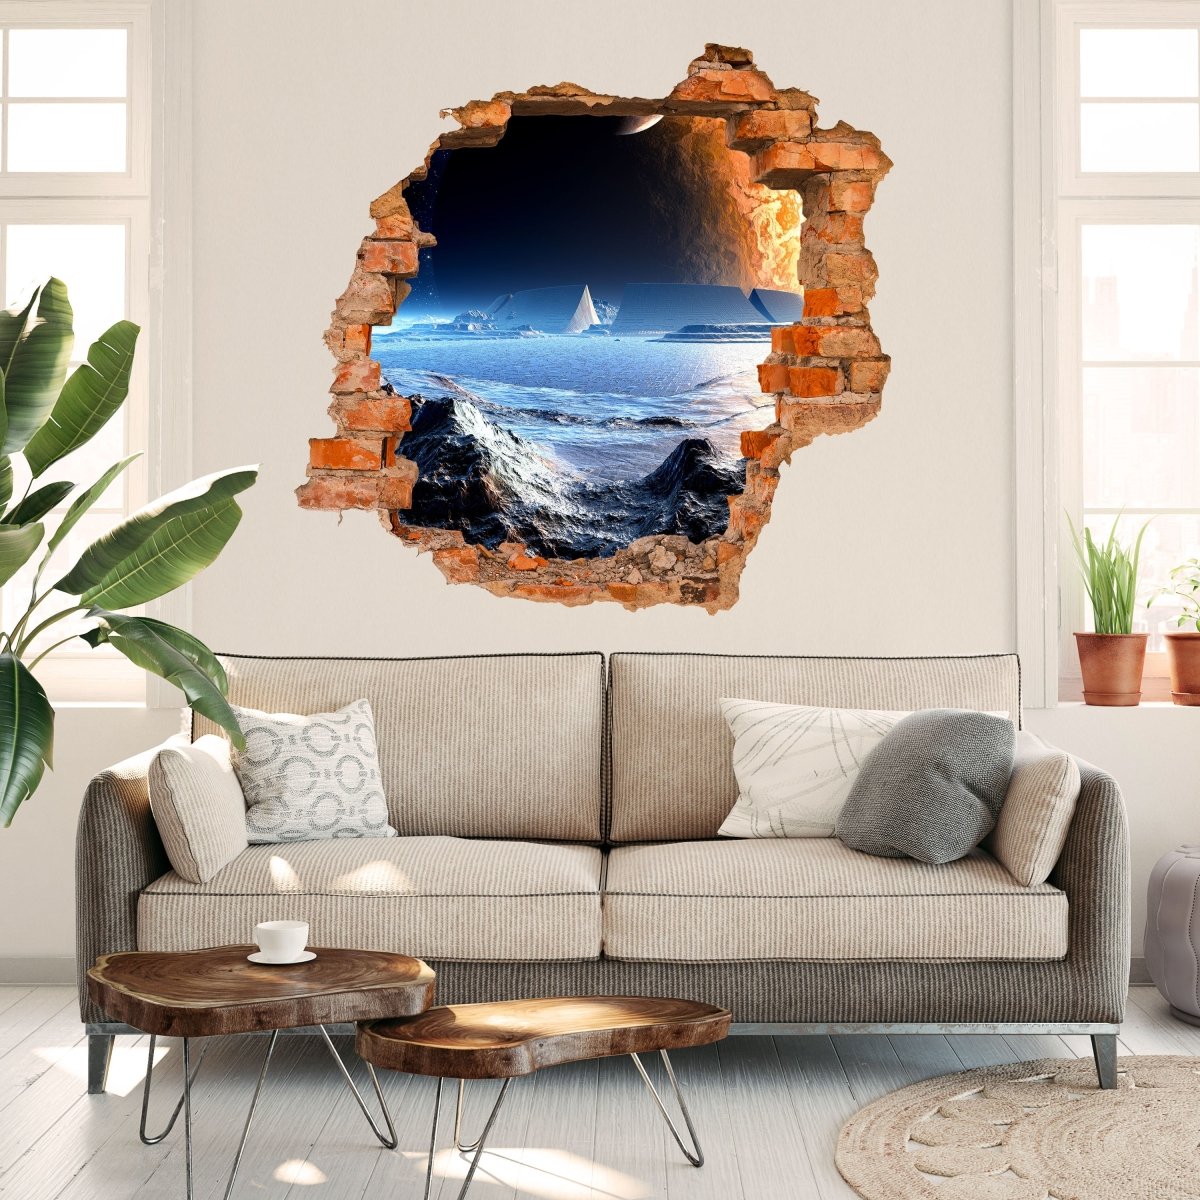 3D wall sticker New Planet - Wall Decal M0441